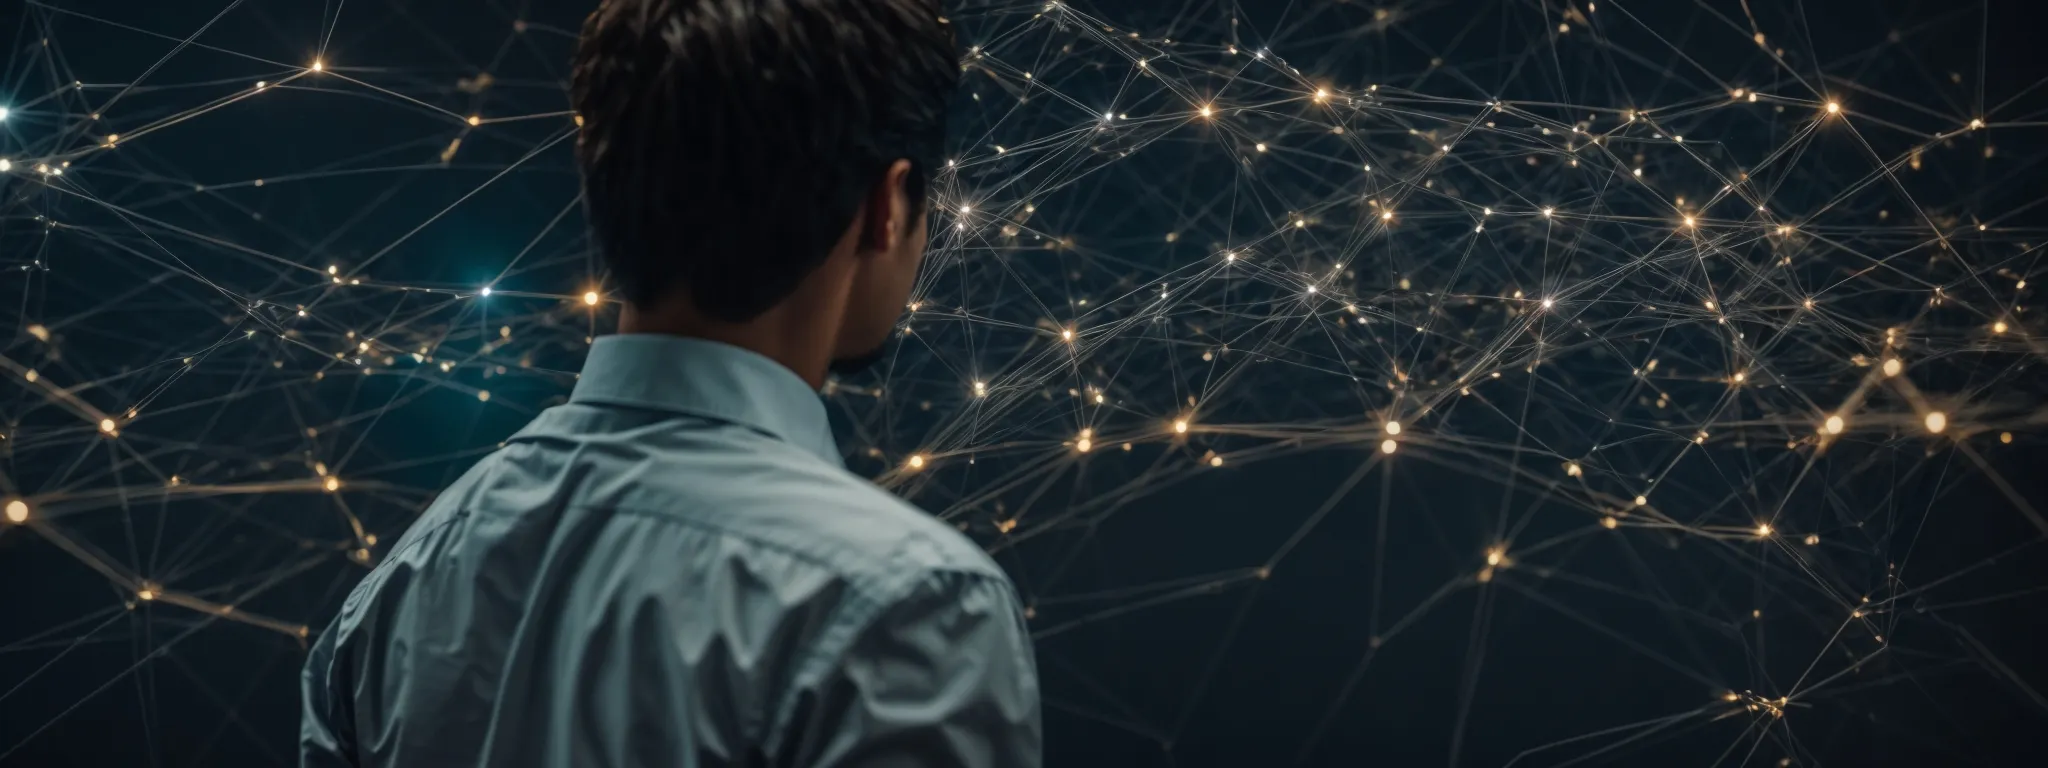 a business person analyzing a complex network of connected nodes on a digital interface to represent strategic link building.